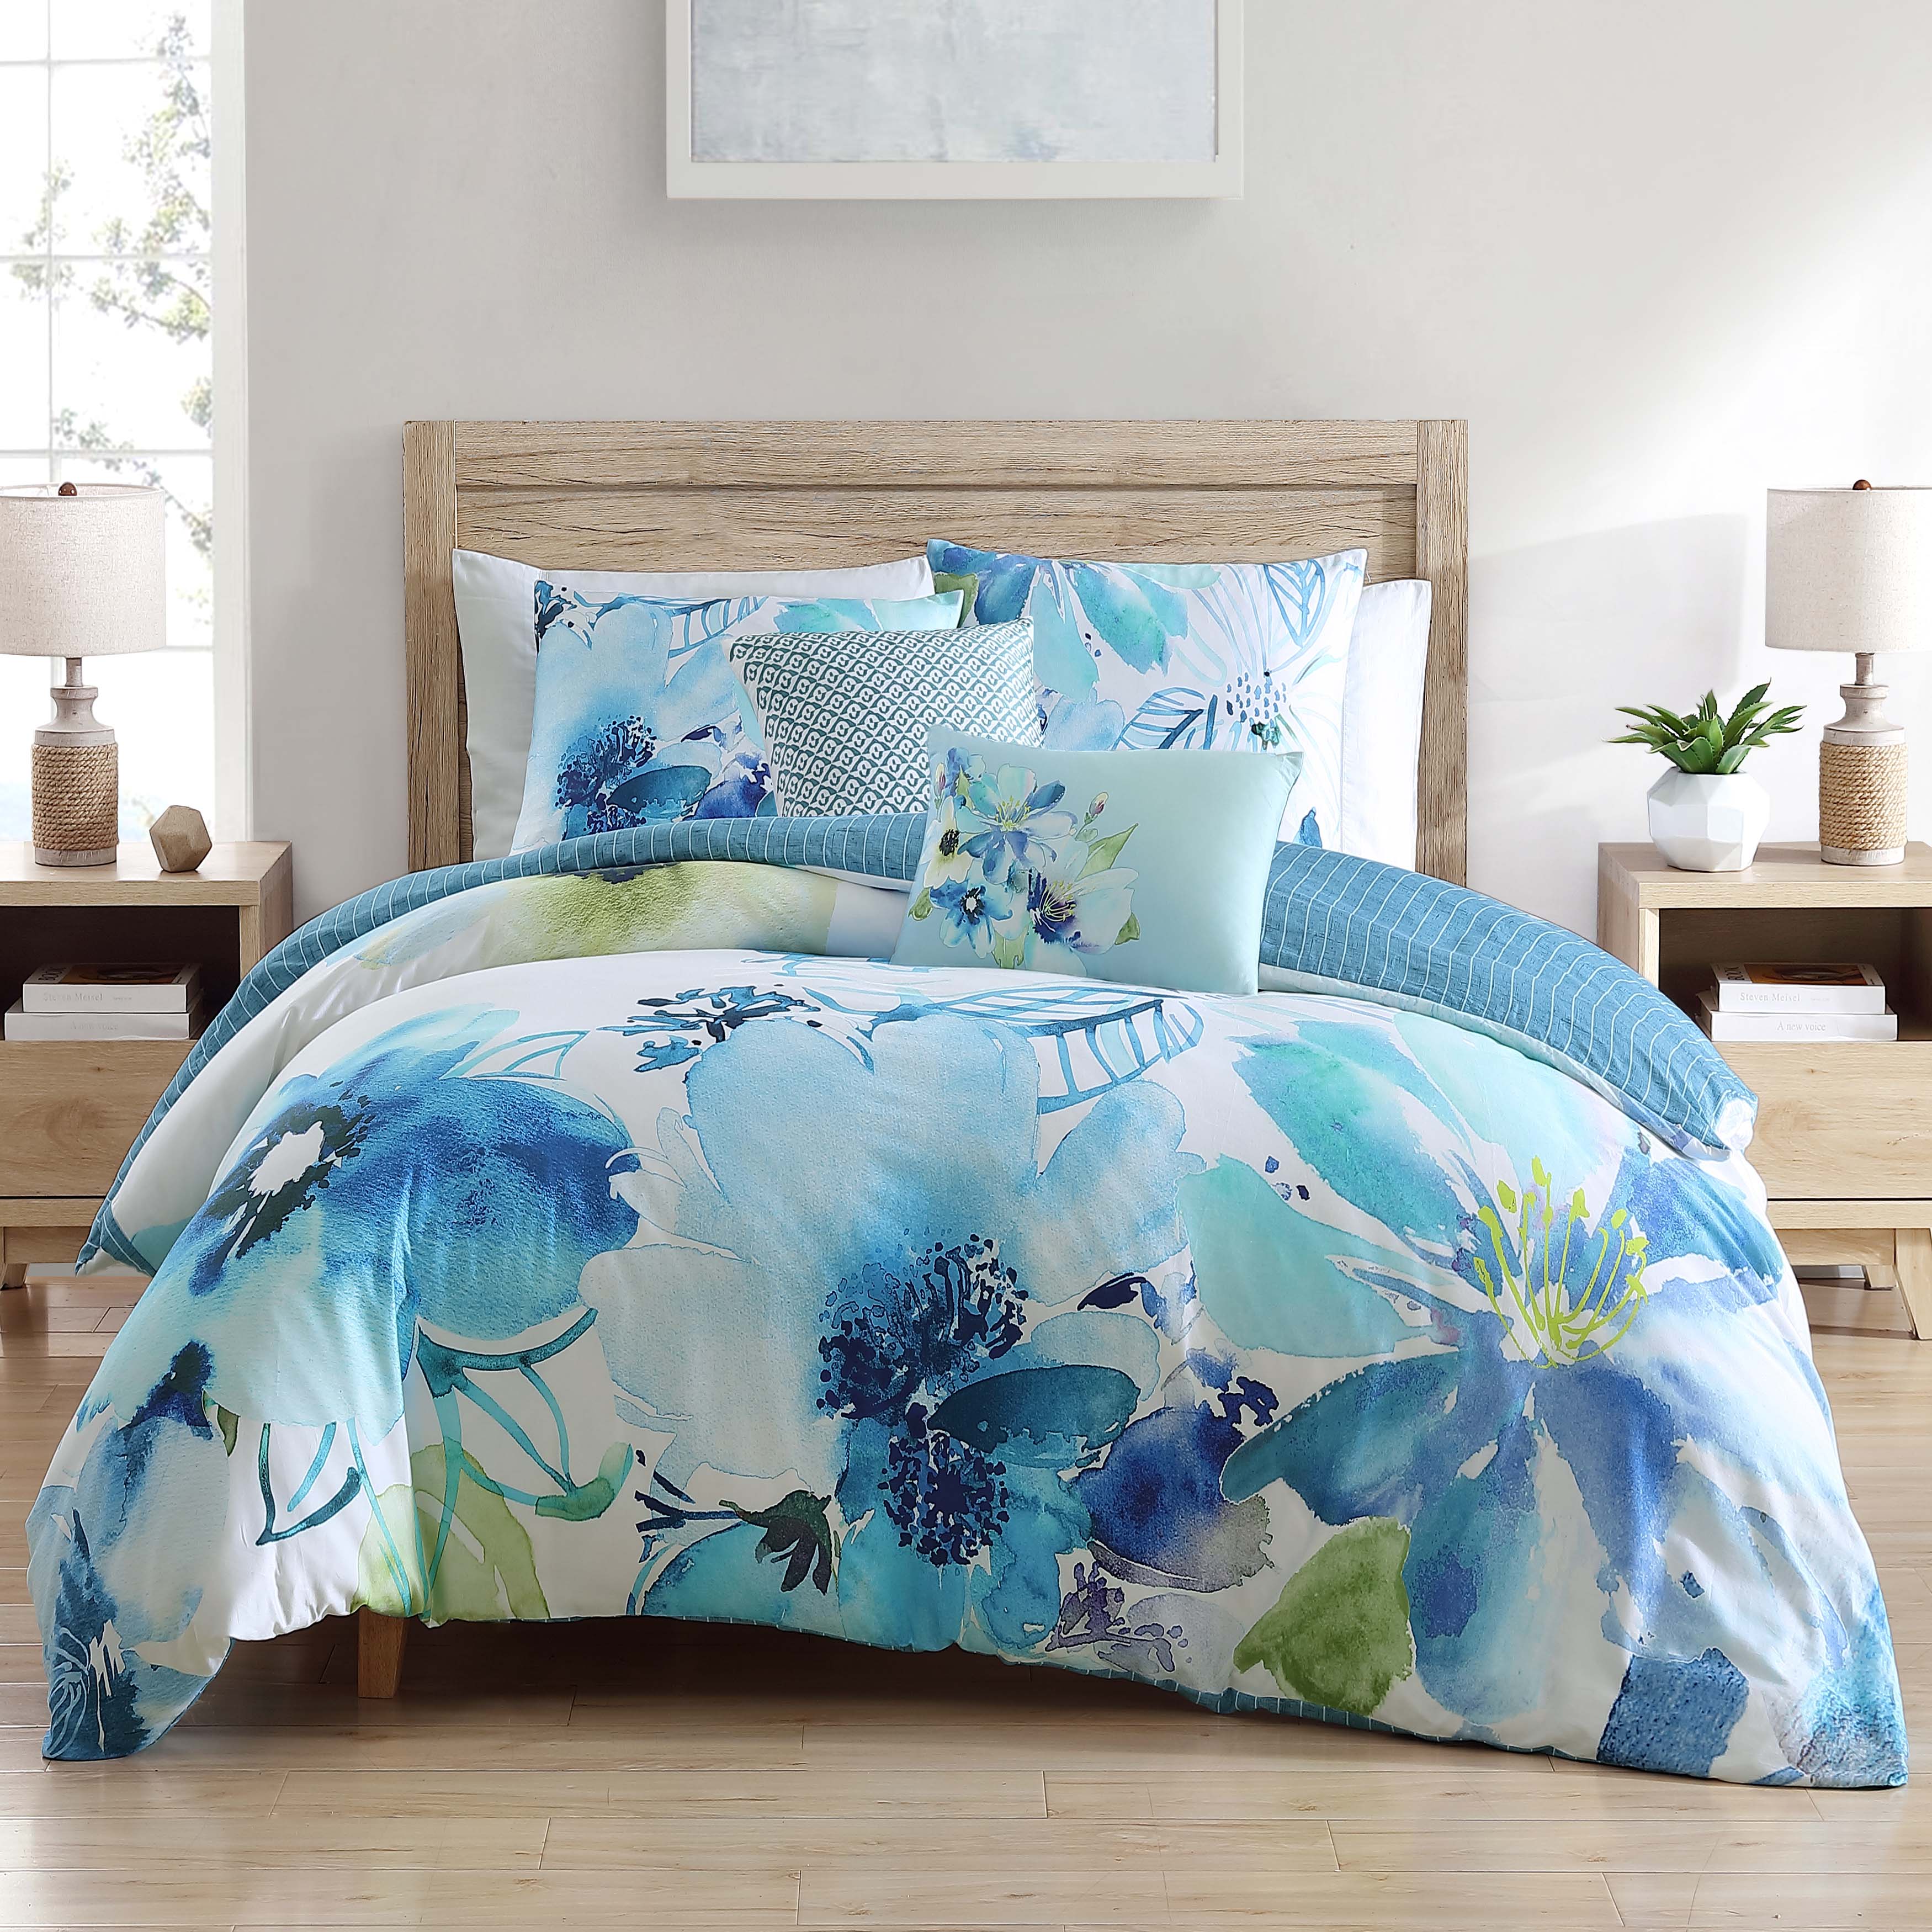 blue and green comforters